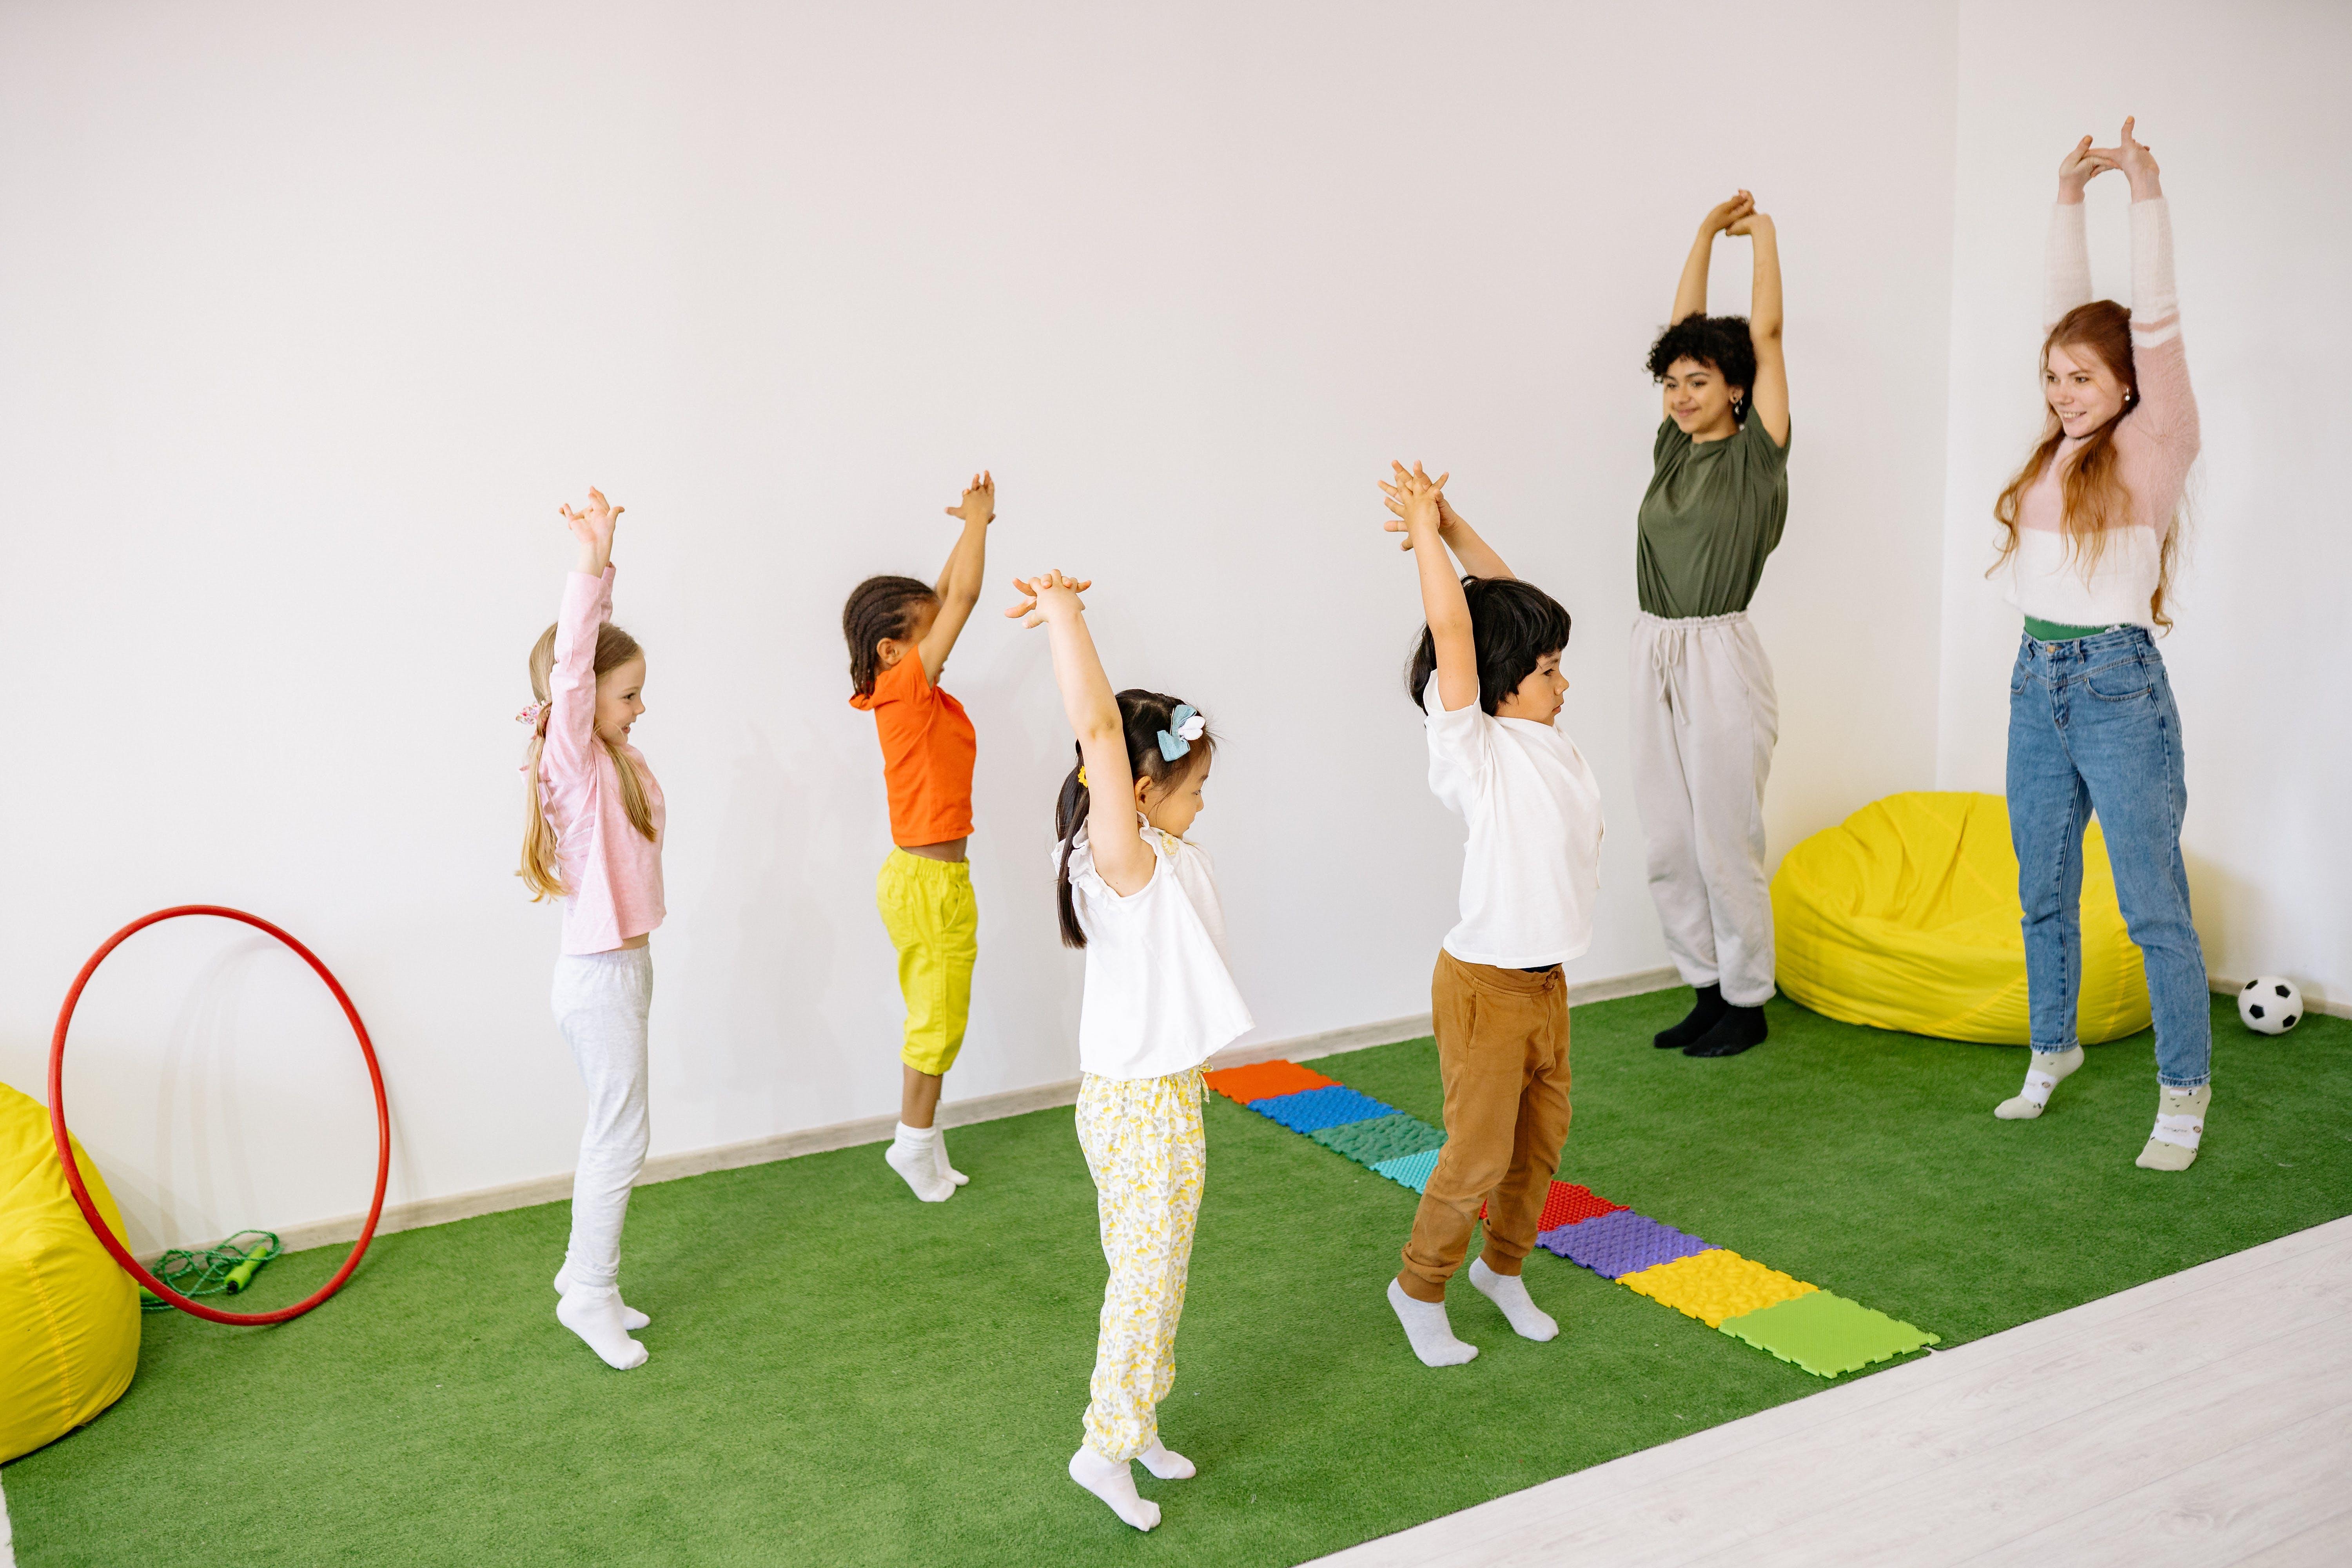 Photograph of children and adults exercising together